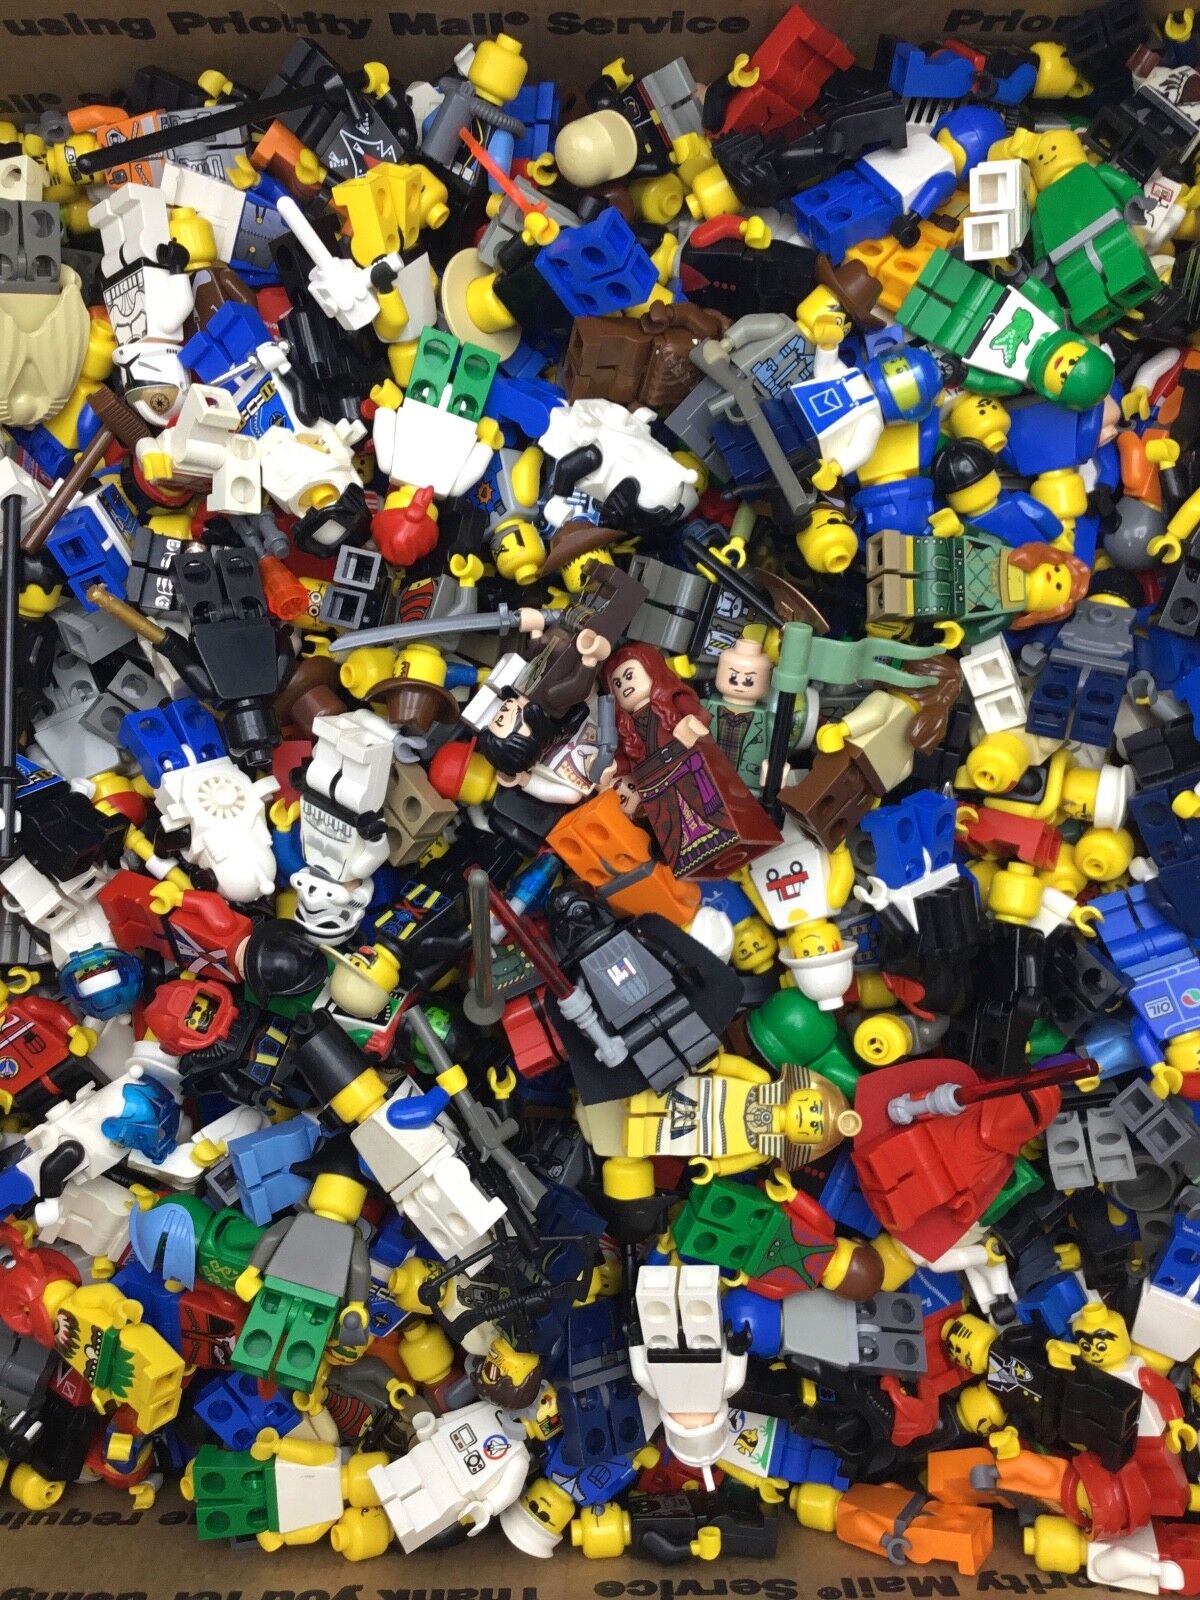 ::LEGO GRAB BAG! 10 MINIFIGURES ALL W/ ITEMS GREAT VARIETY PEOPLE STAR WARS & MORE